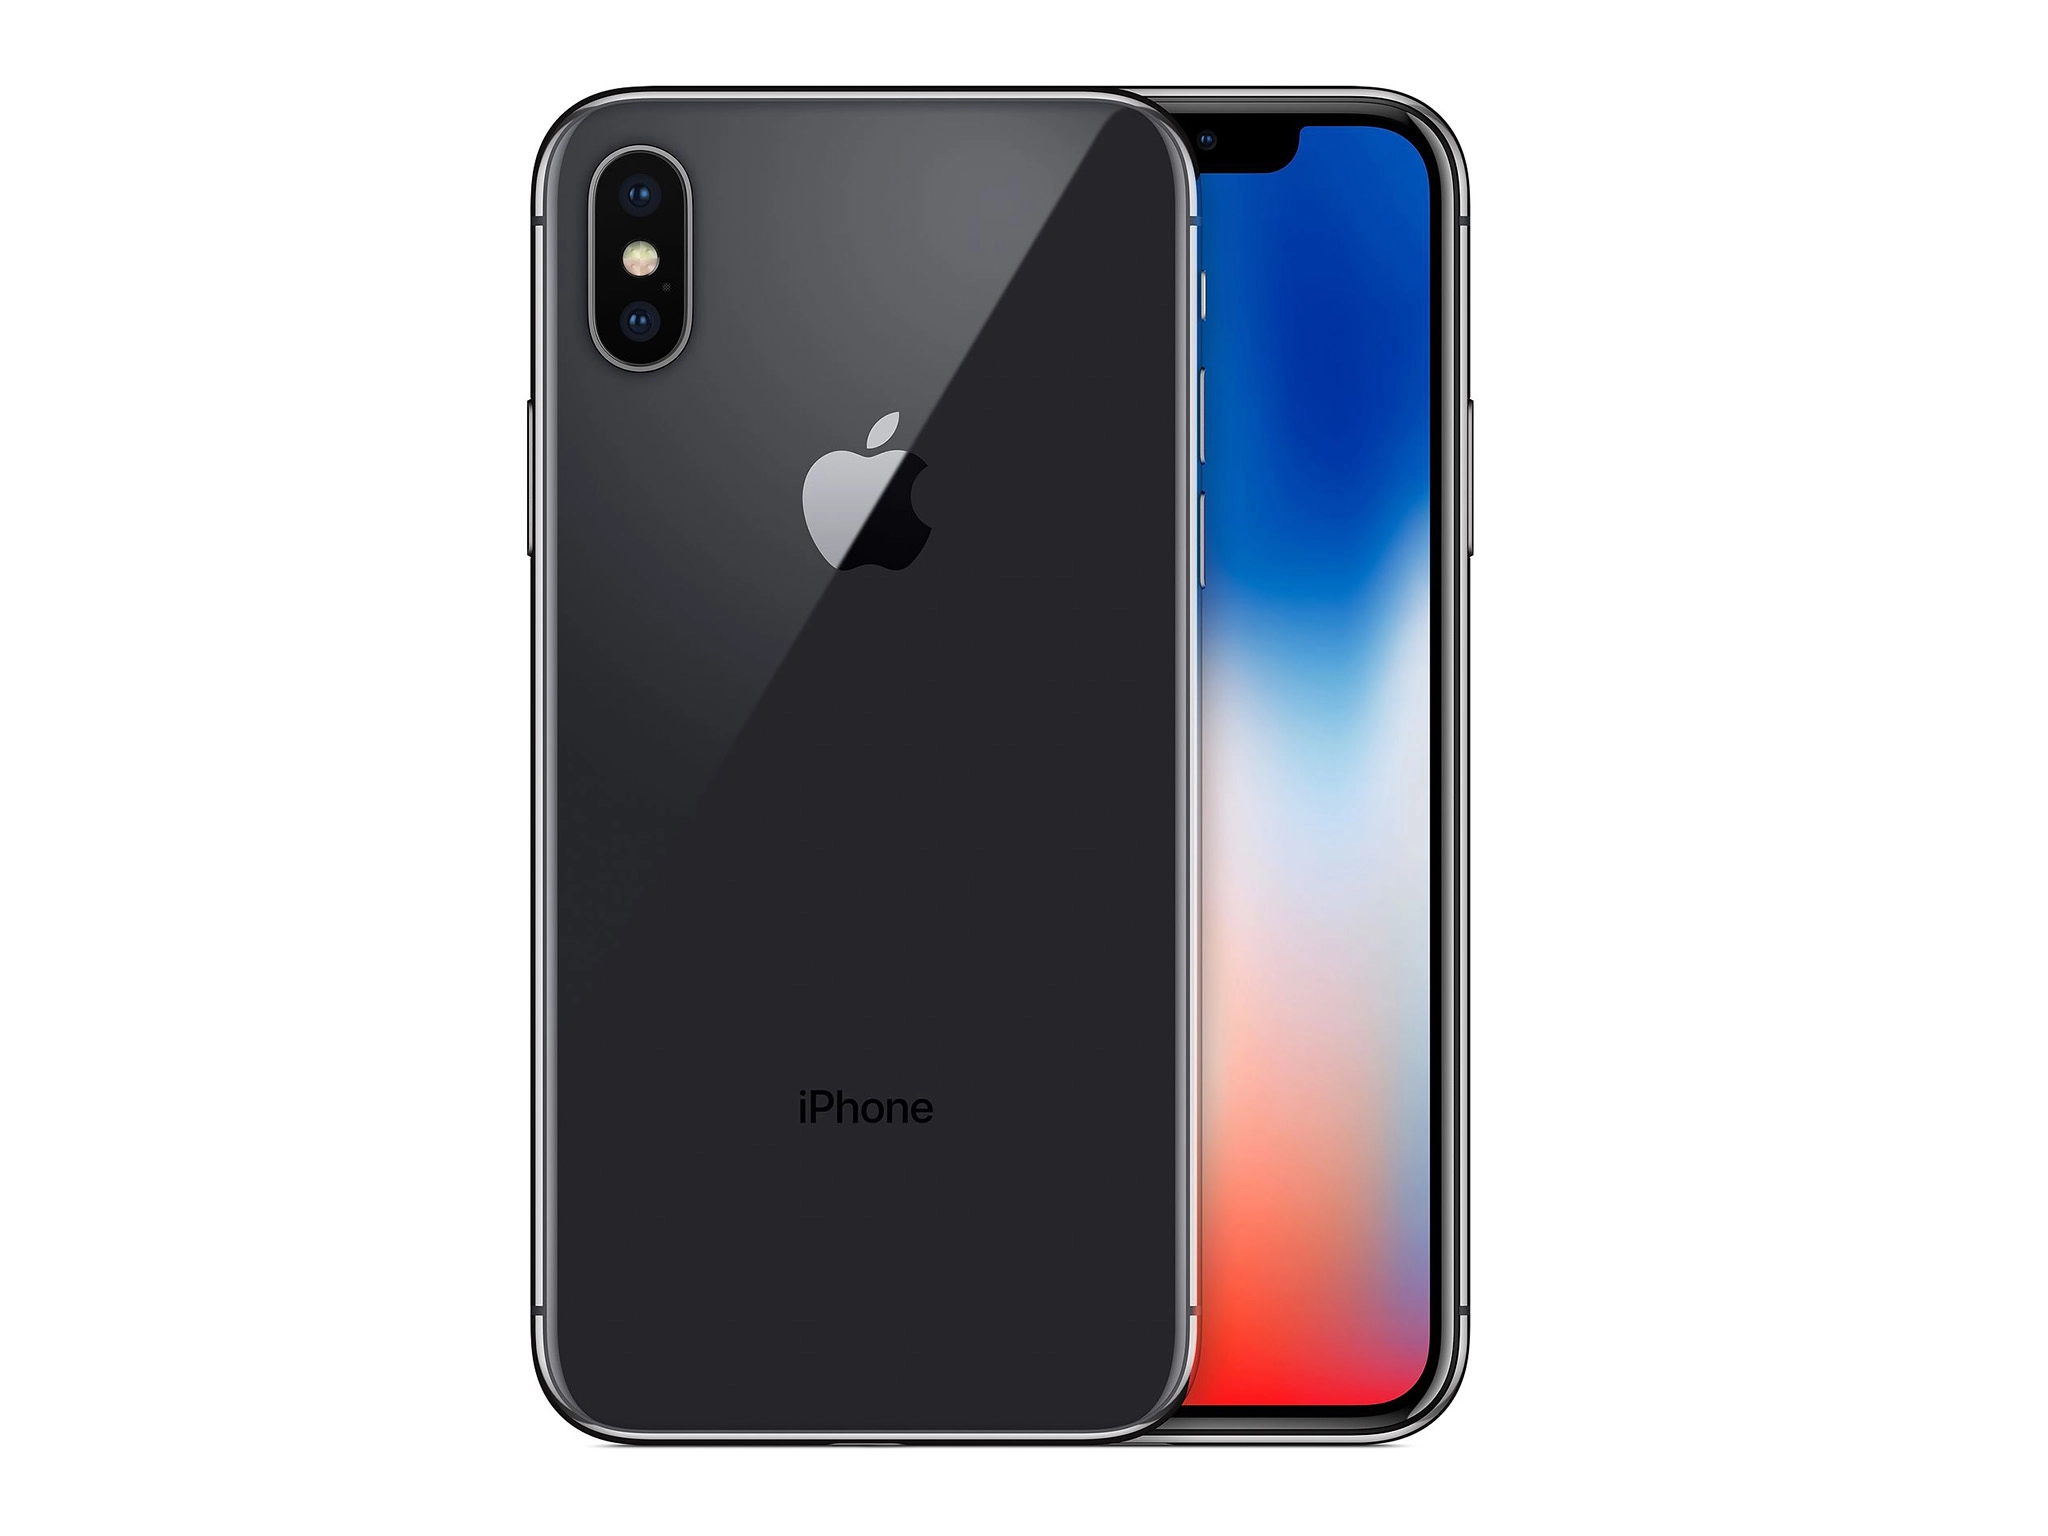 Apple iPhone X (64GB) - Refreshed Device